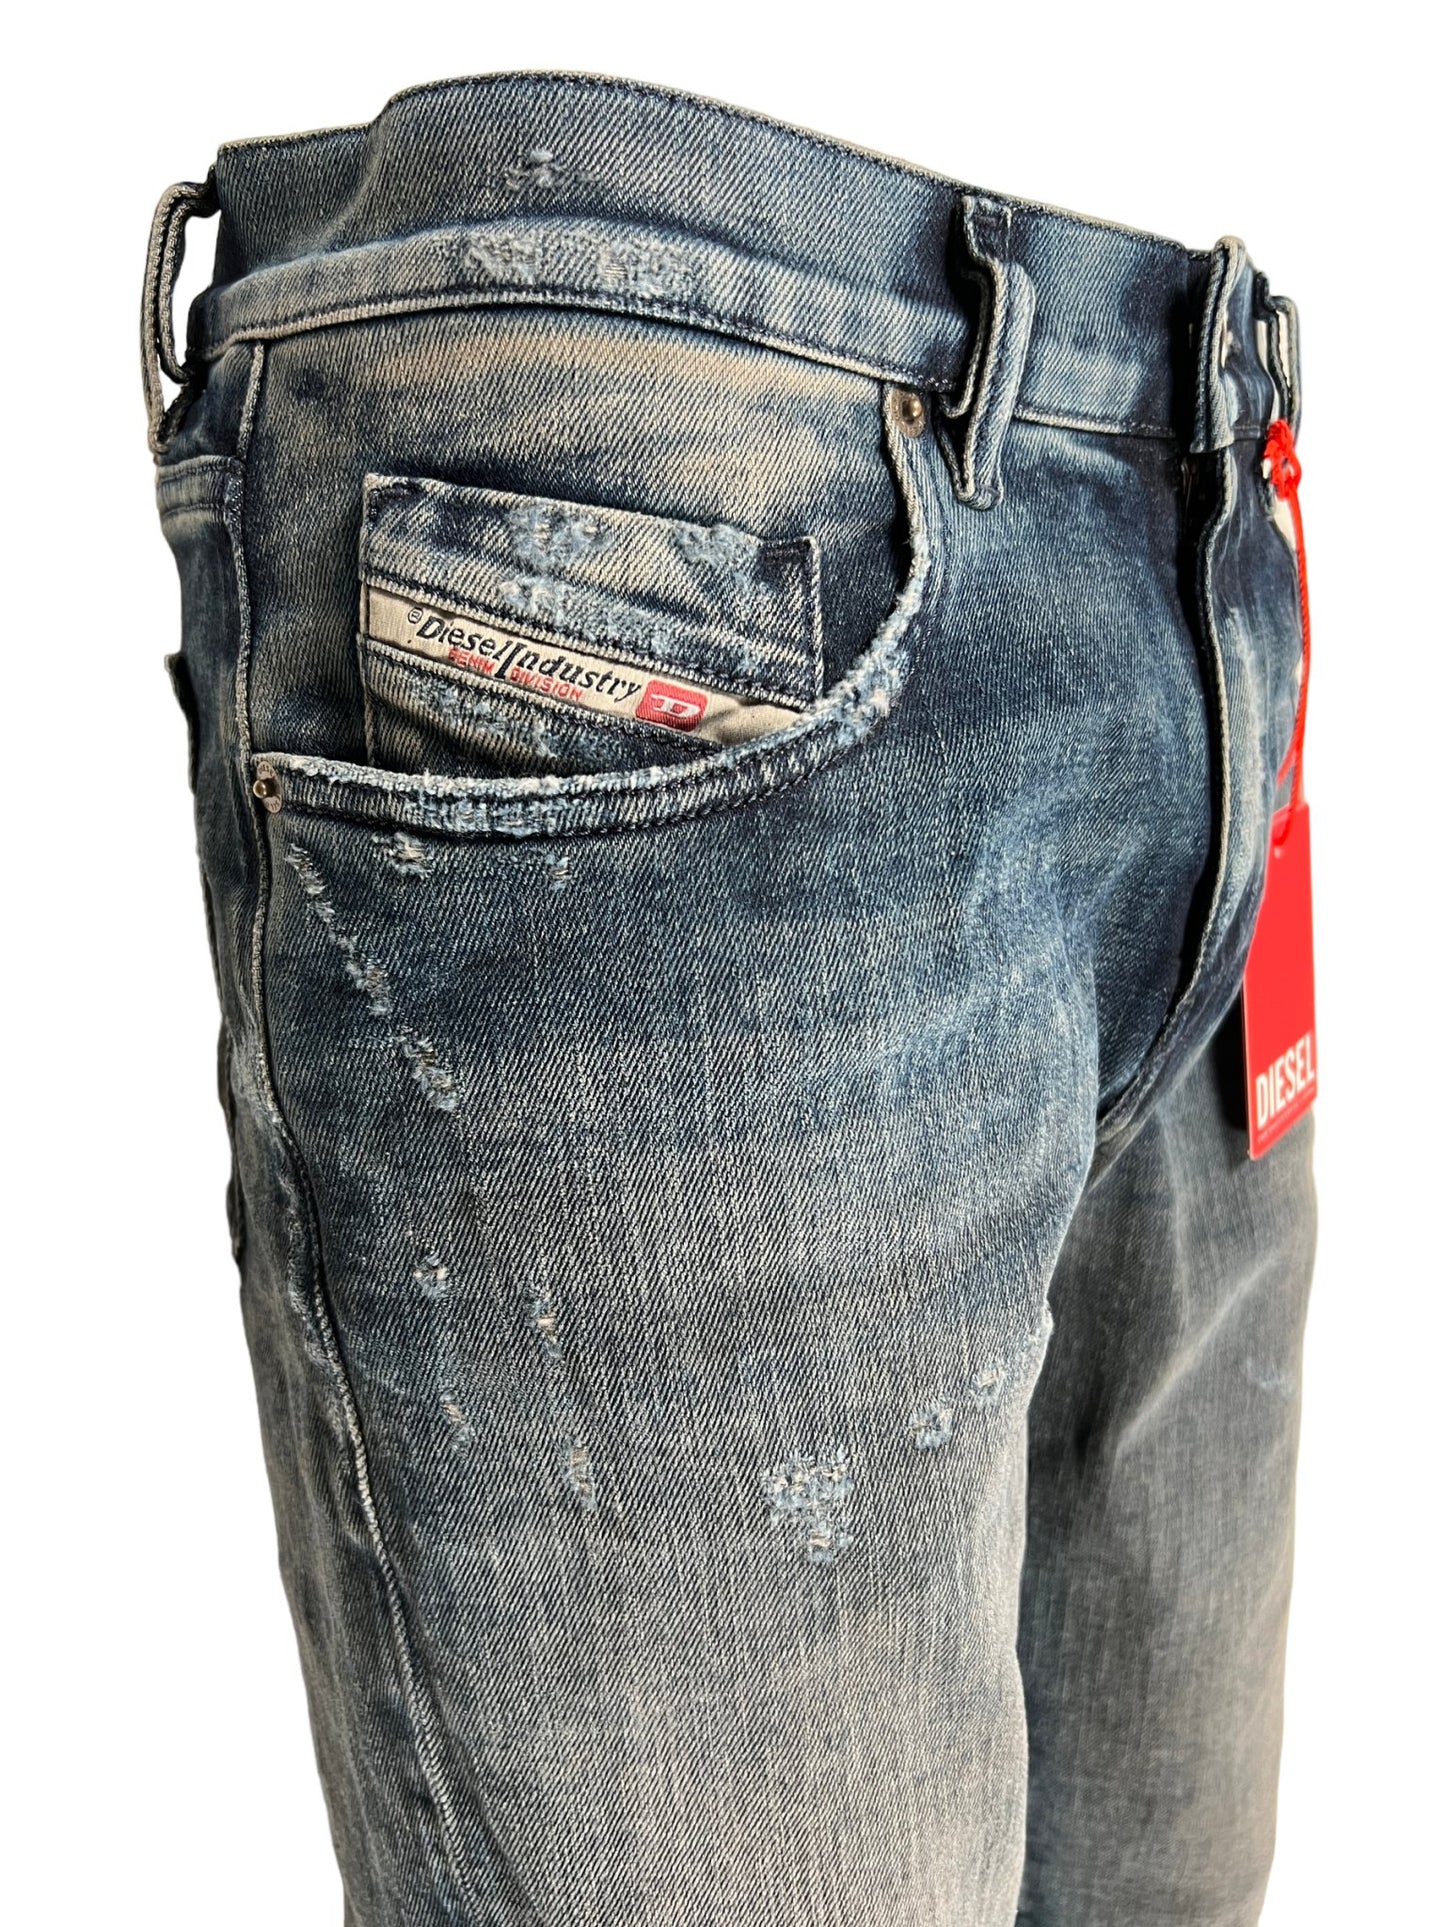 A comfortable pair of DIESEL JEANS 2019 D-STRUKT 9H54 with a tag on the pocket.